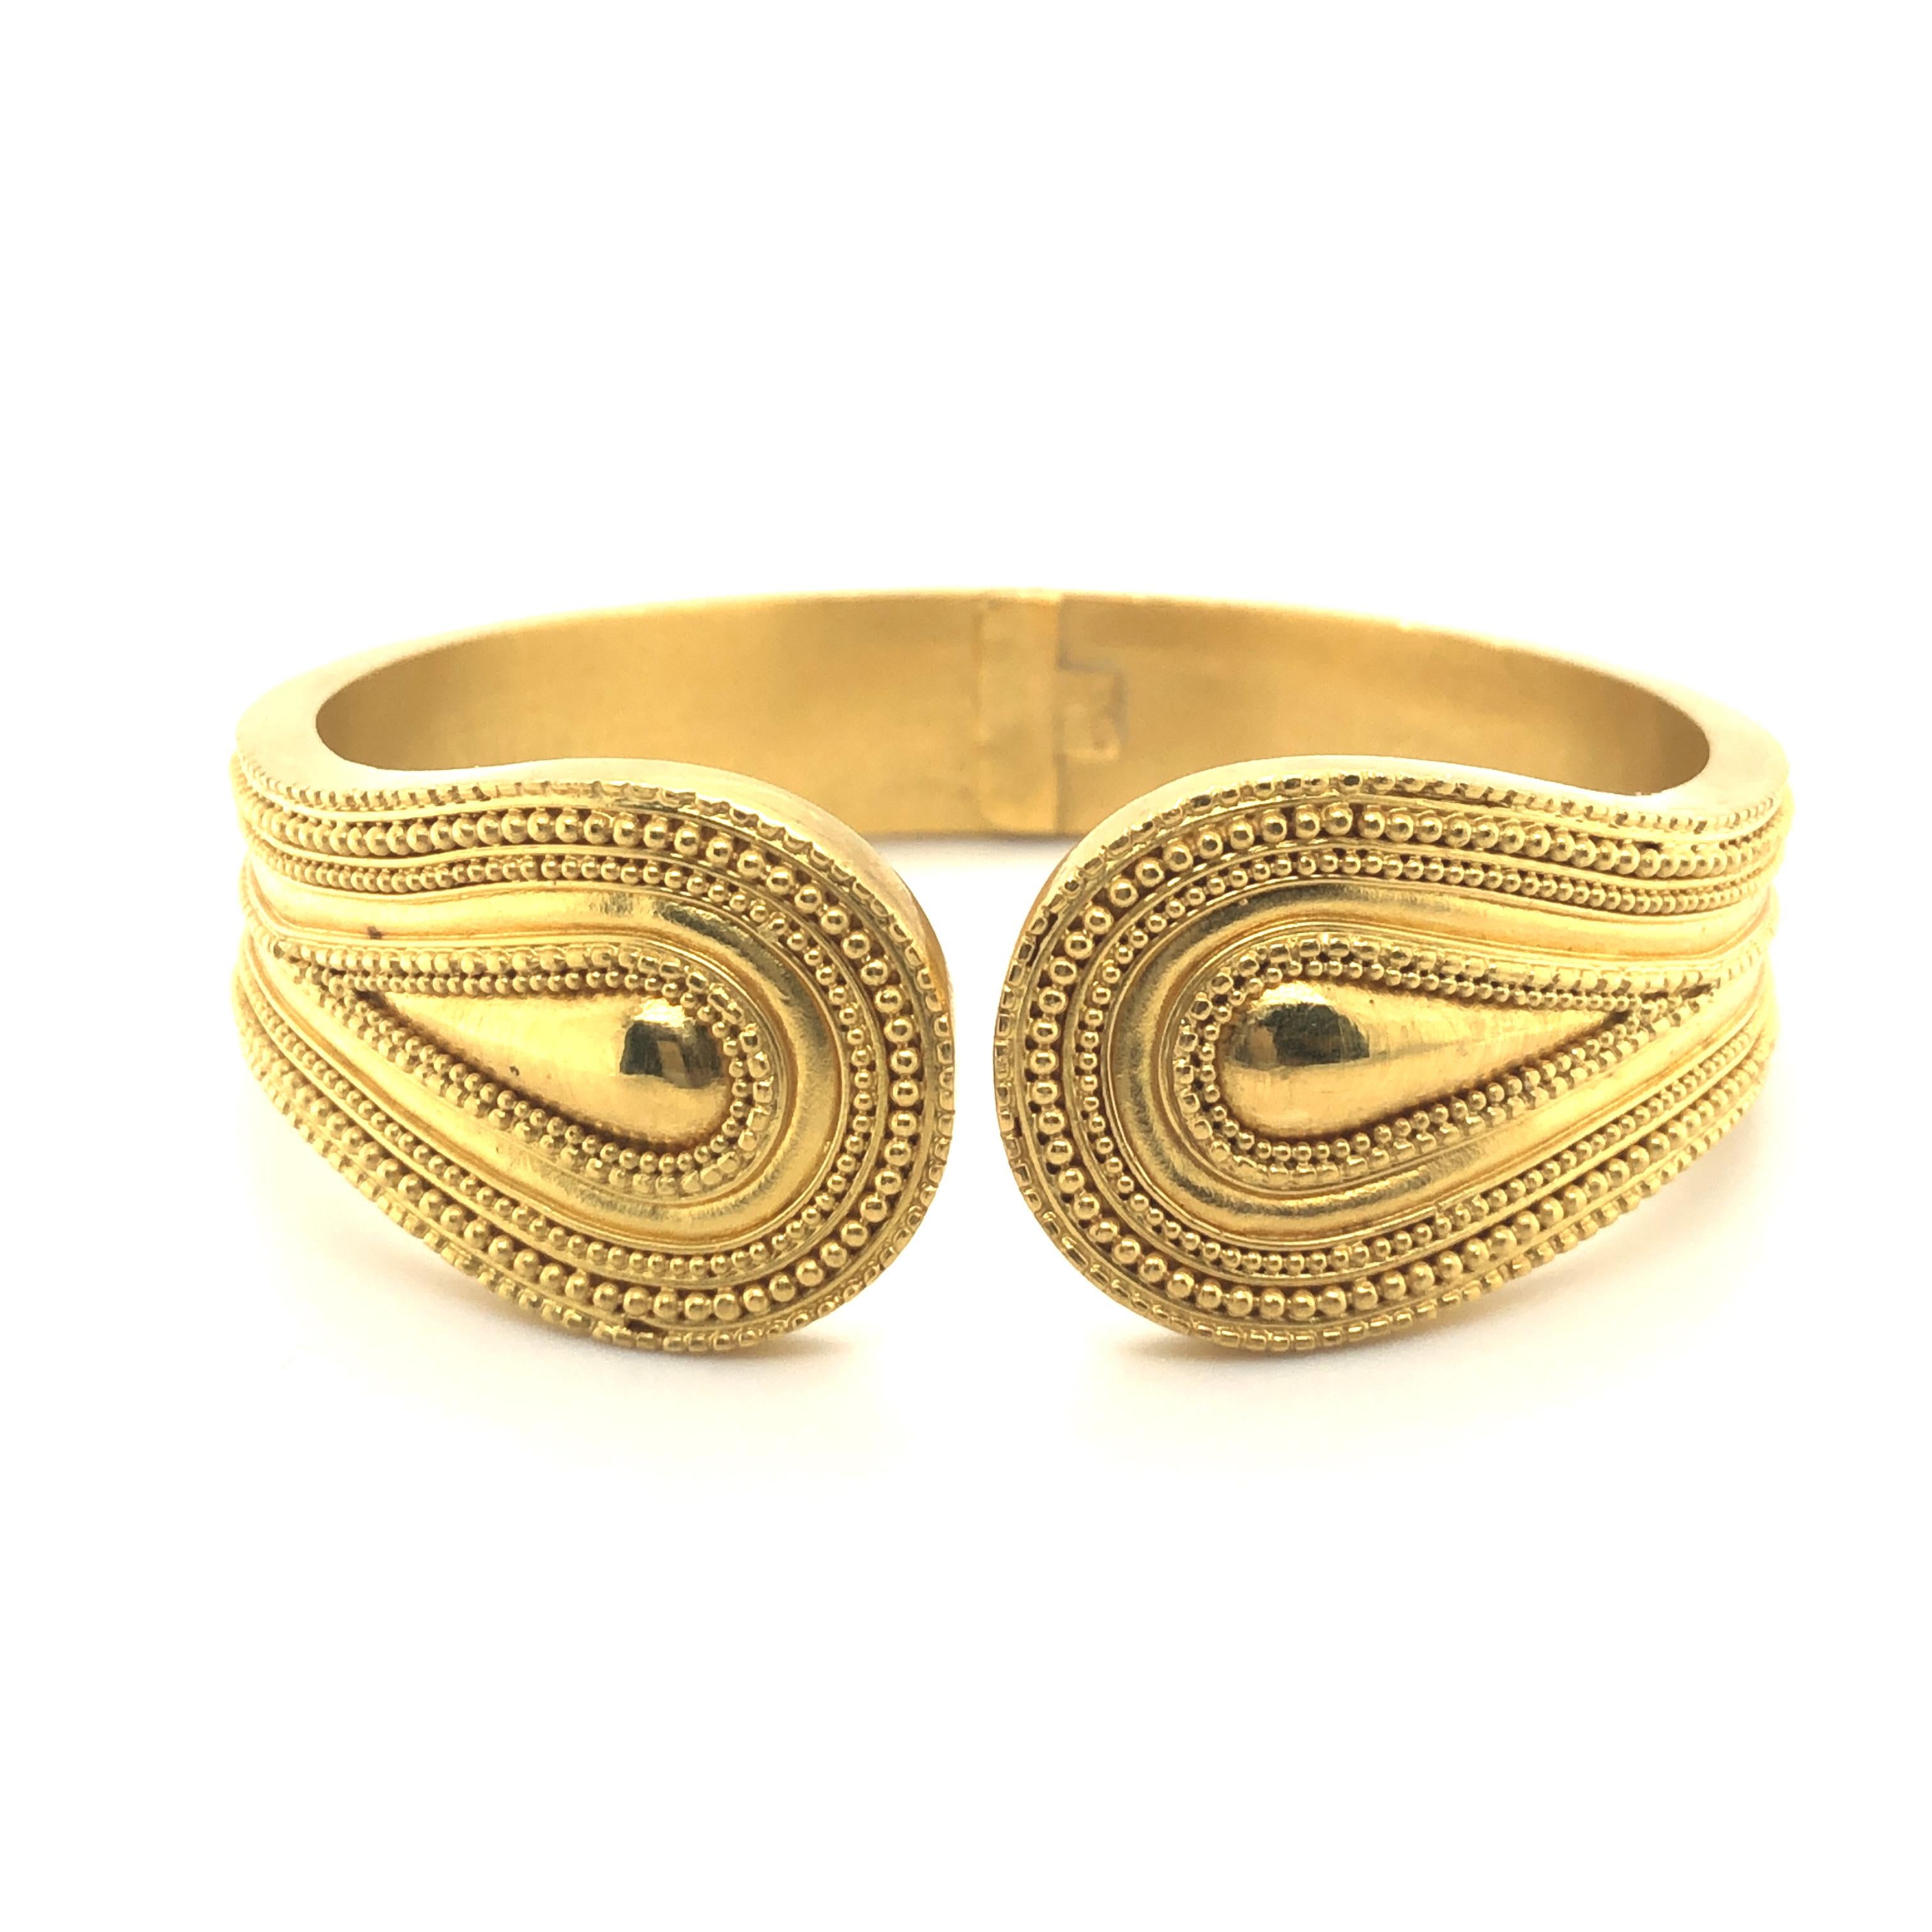 This classic cuff bracelet by Greek designer Ilias Lalaounis is crafted in 18 karat yellow gold and is accented by beaded and curved lines. The bangle is hollow and the terminals als elegantly widened.

Very chic and comfortable to wear.

Maker's